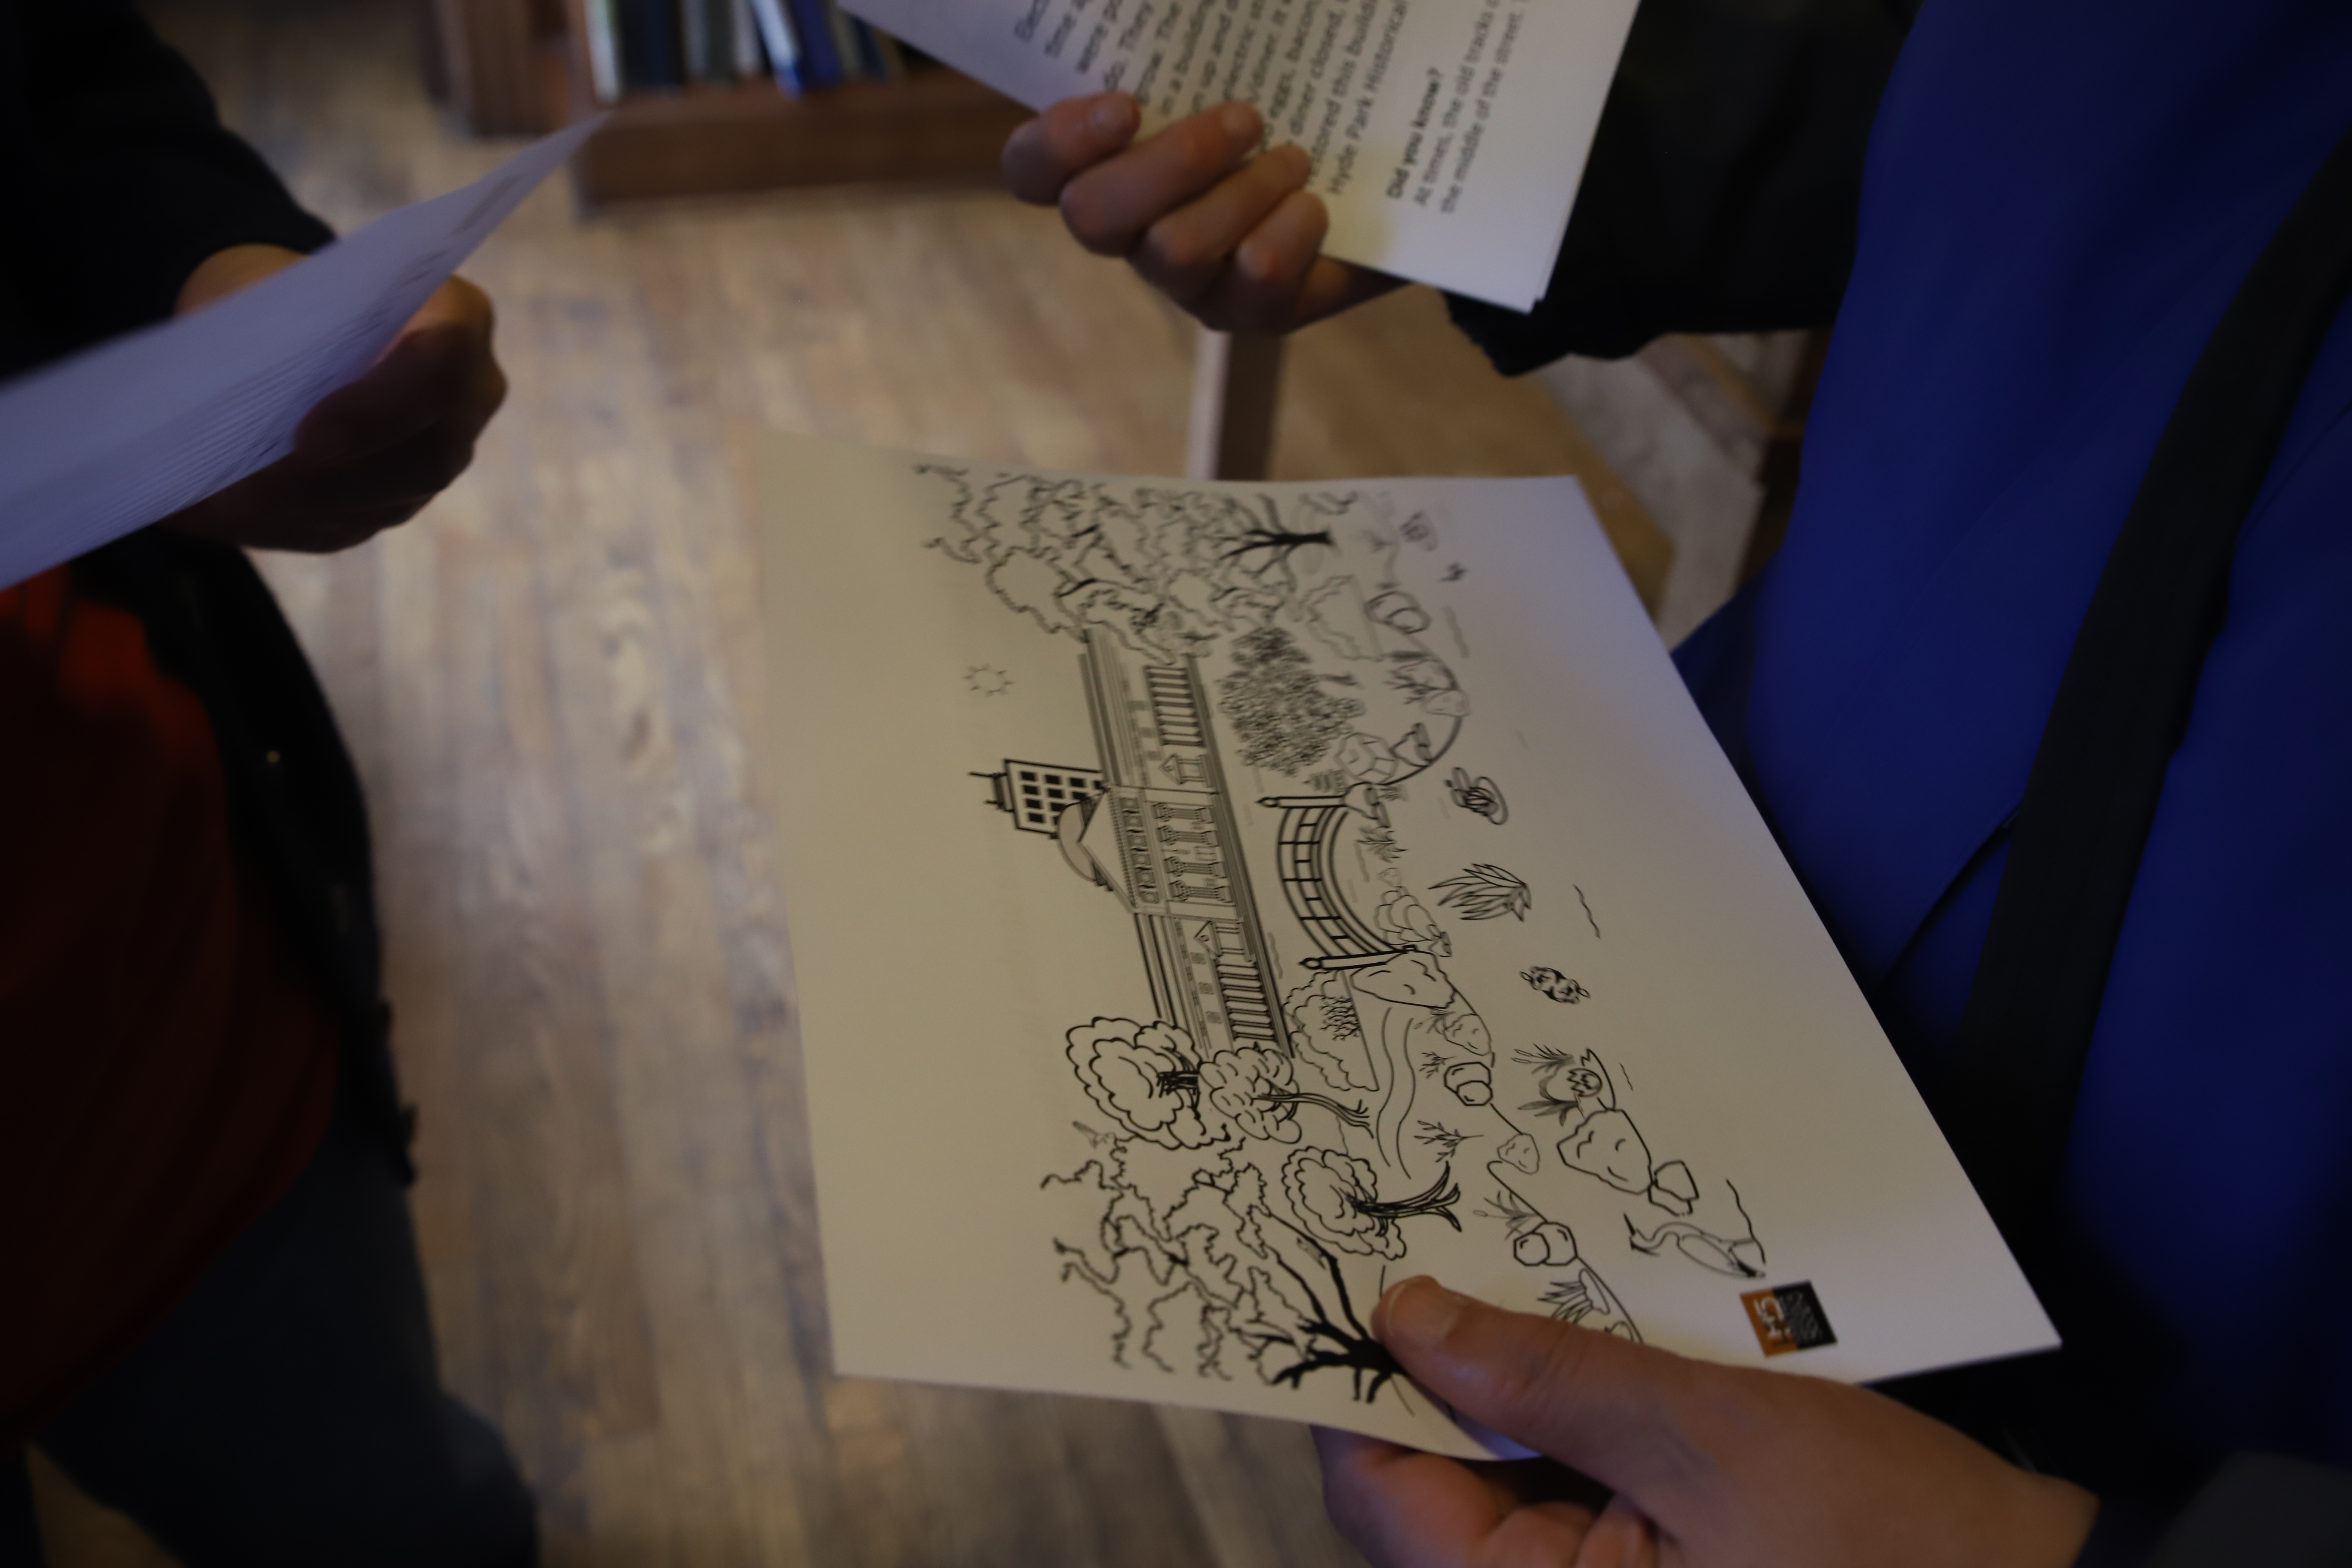 Children's coloring activity provided at Open House Chicago | photo by Jana Simovic